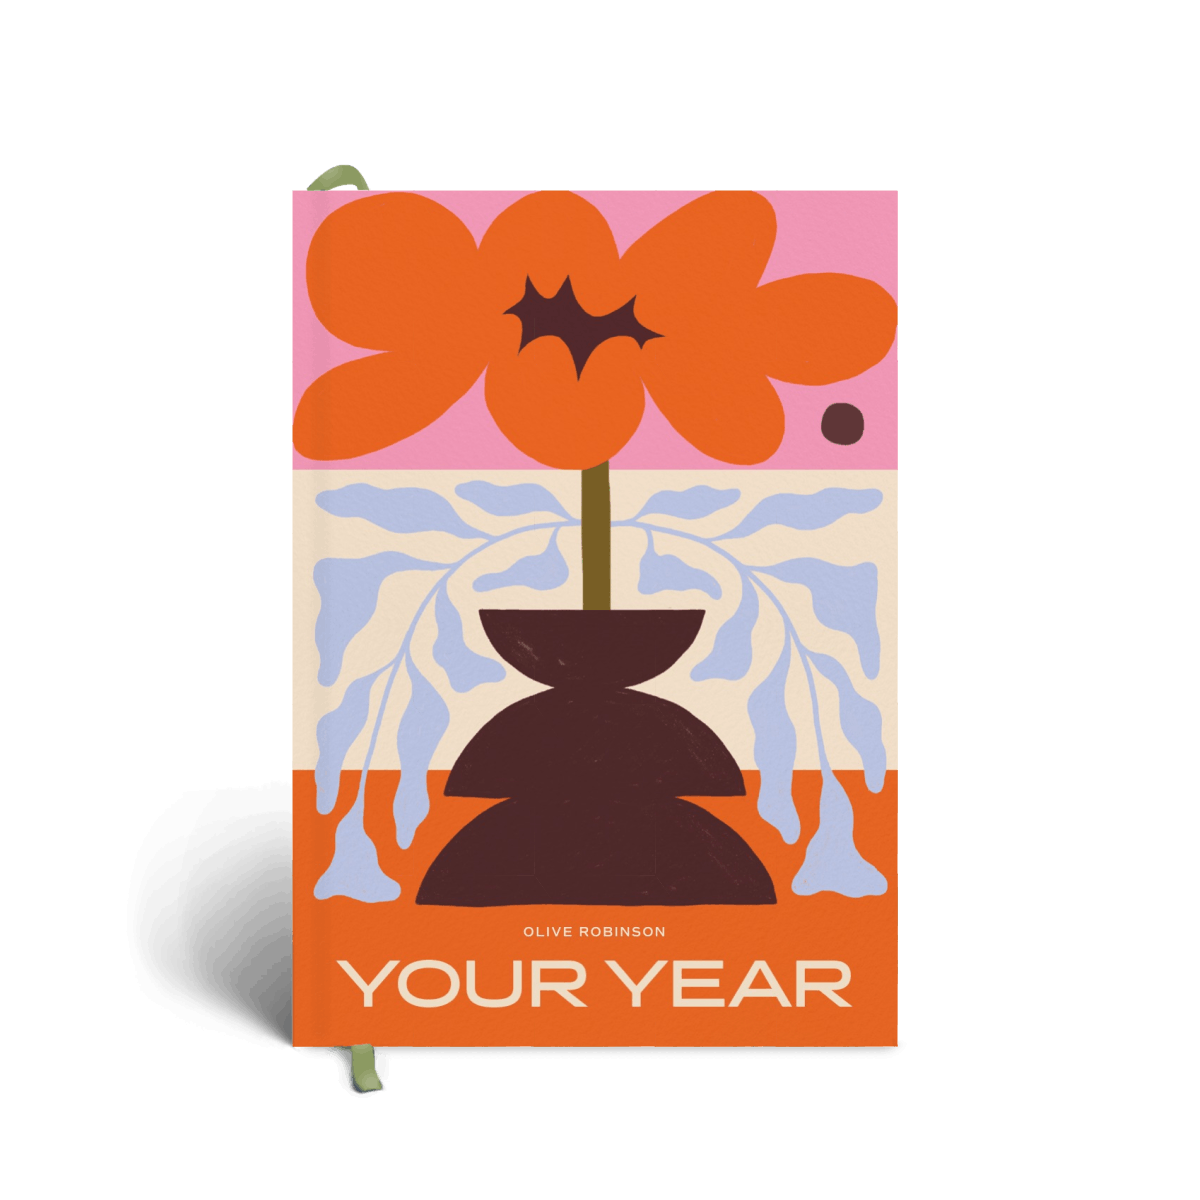 Your Year